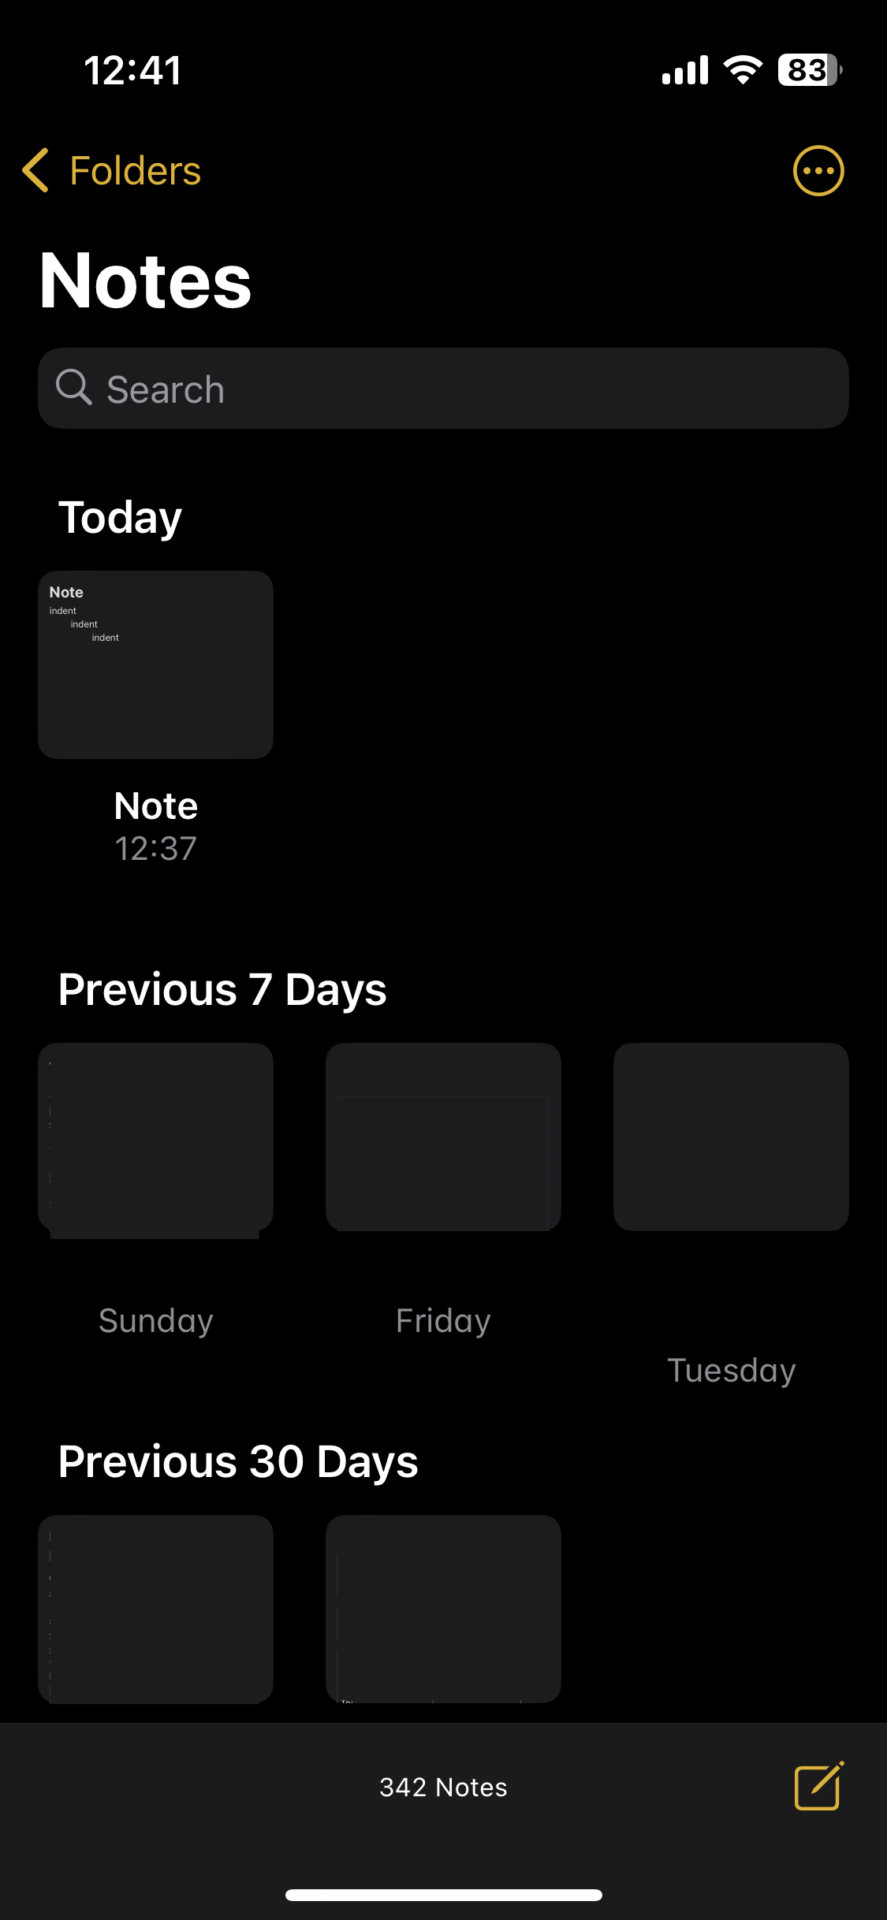 Picture about gallery mode of iPhone memo